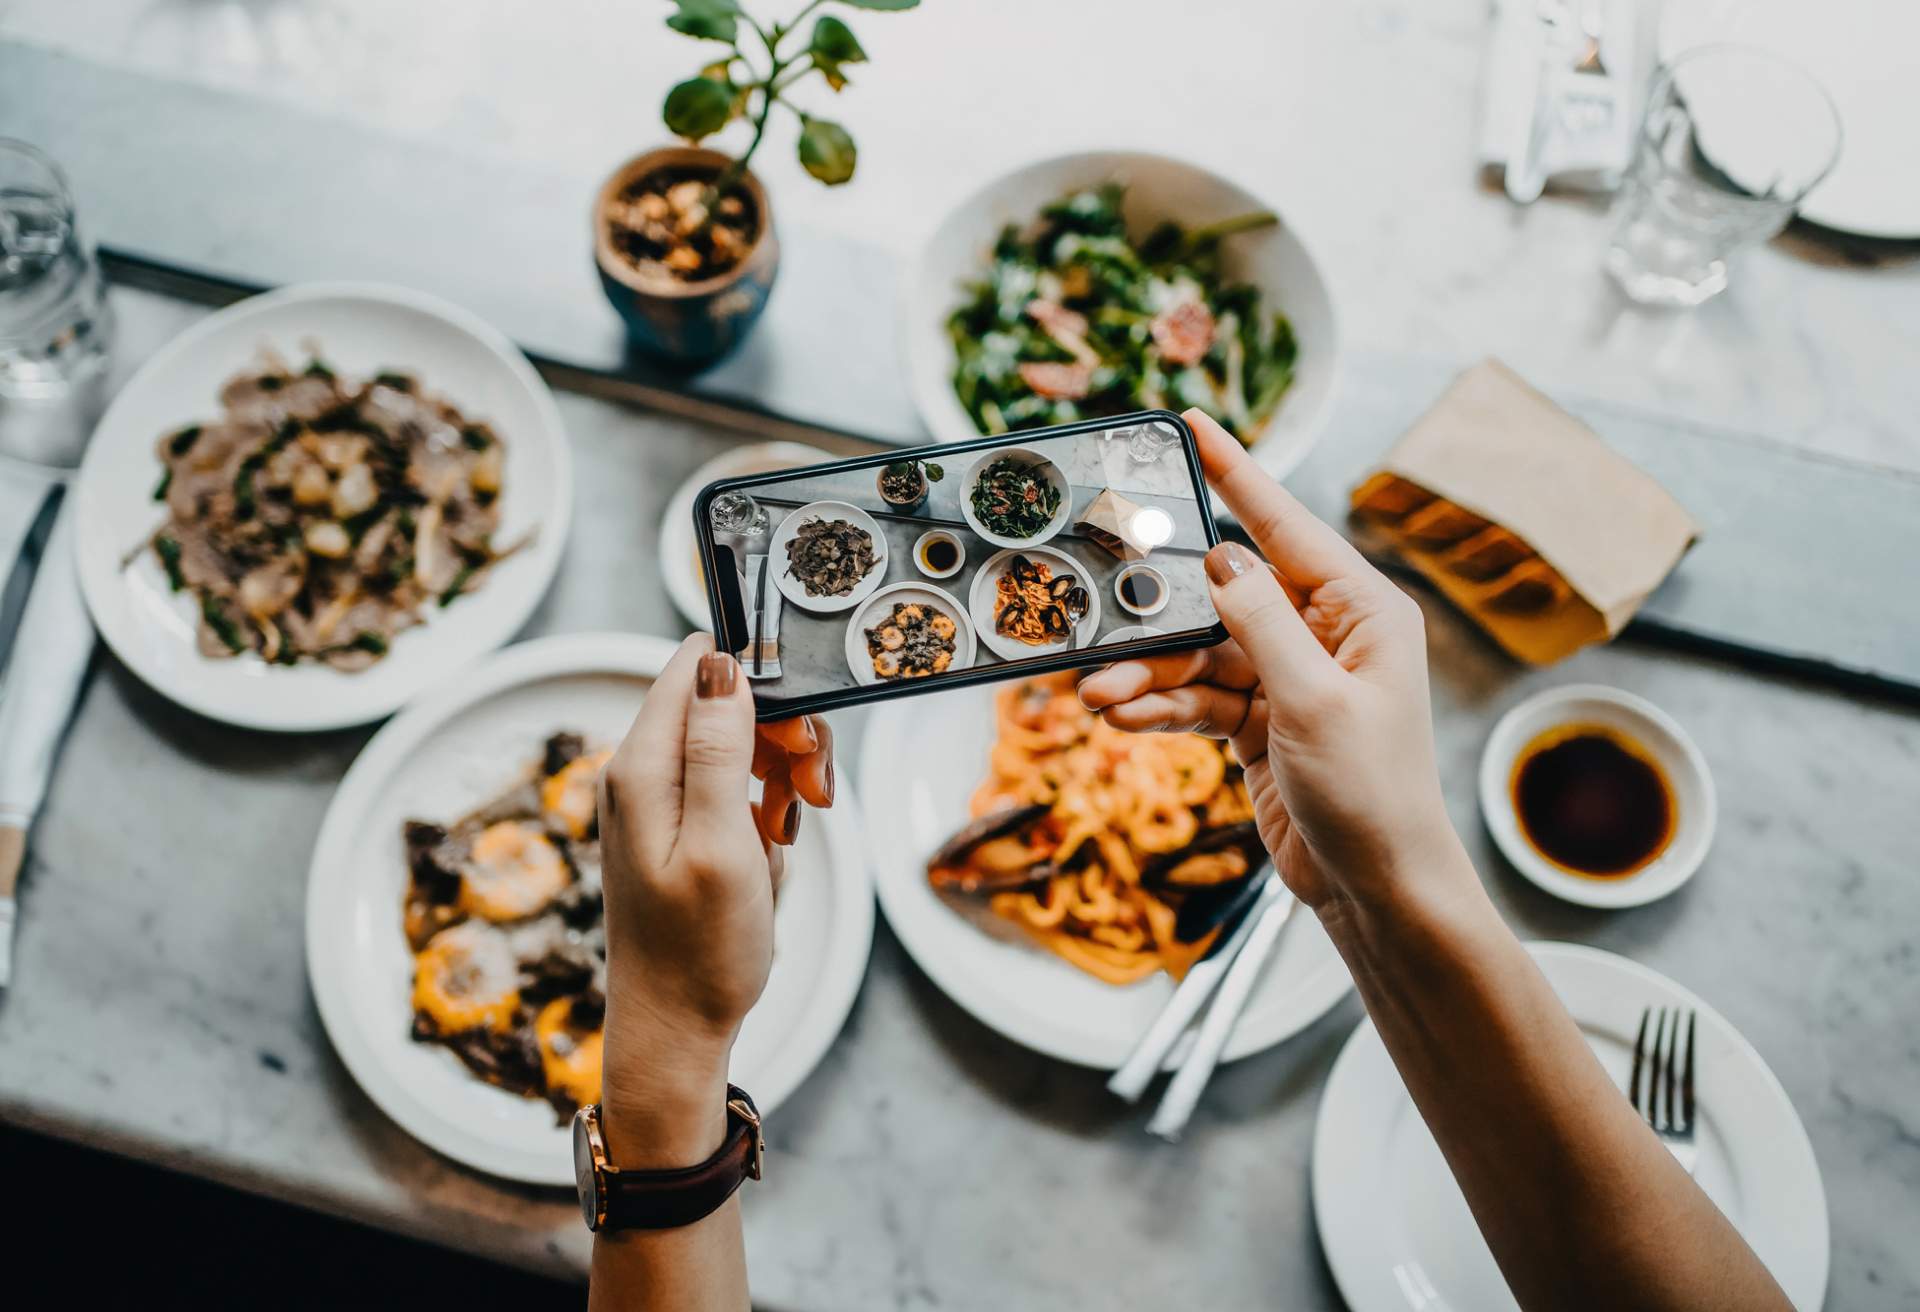 60 Proven Restaurant Promotion Ideas That Work in 2023